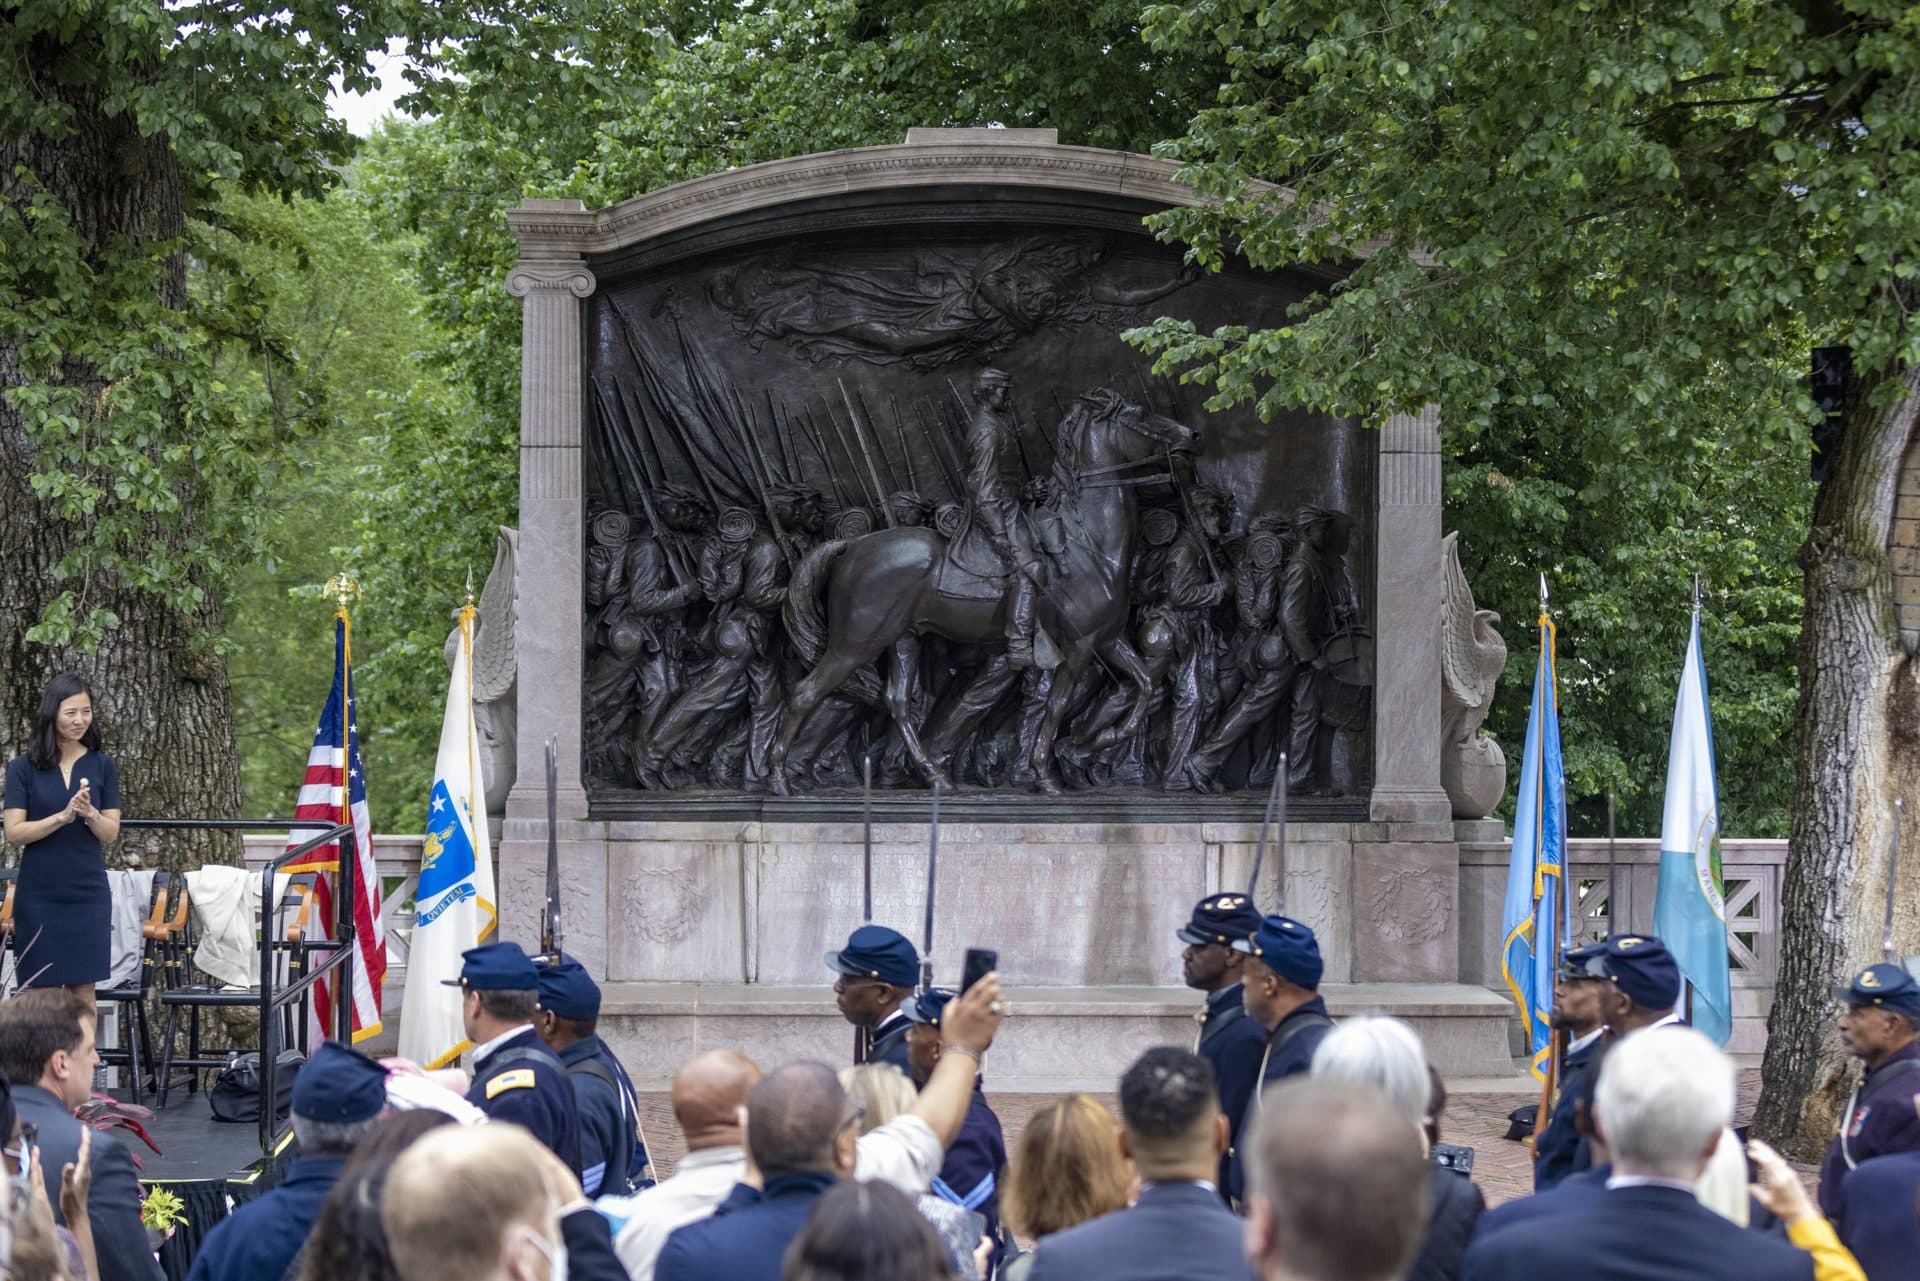 Members of the audience watch as the 54th Massachusetts Volunteer Regiment march past the Robert Gould Shaw and the 54th Regiment Memorial. (Jesse Costa/WBUR)